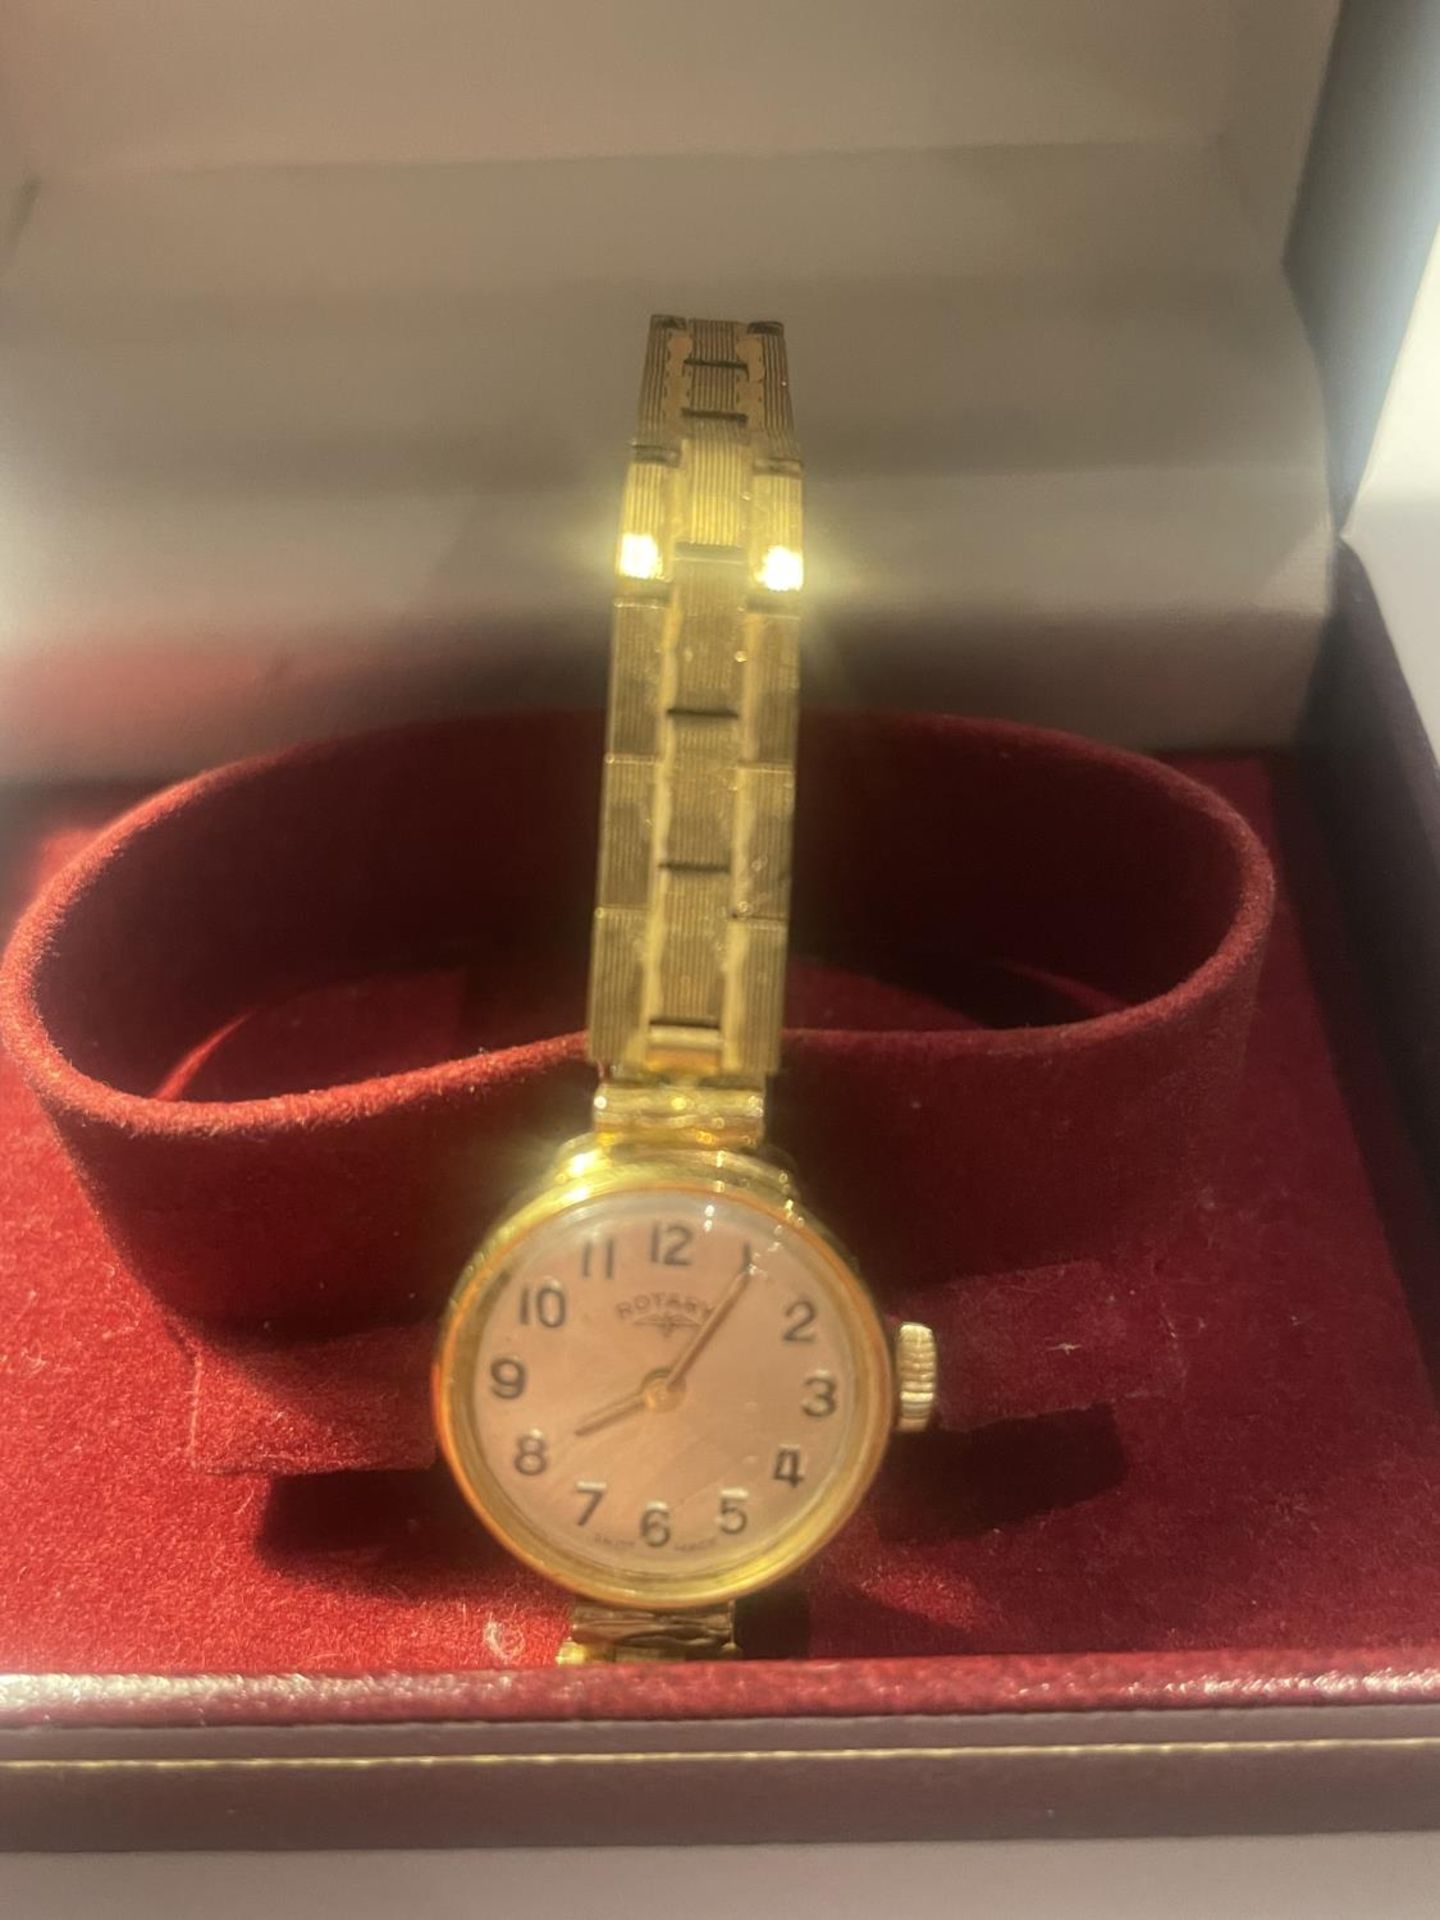 A LADIES ROTARY WRISTWATCH IN A PRESENTATION BOX SEEN WORKING BUT NO WARRANTY - Image 2 of 2